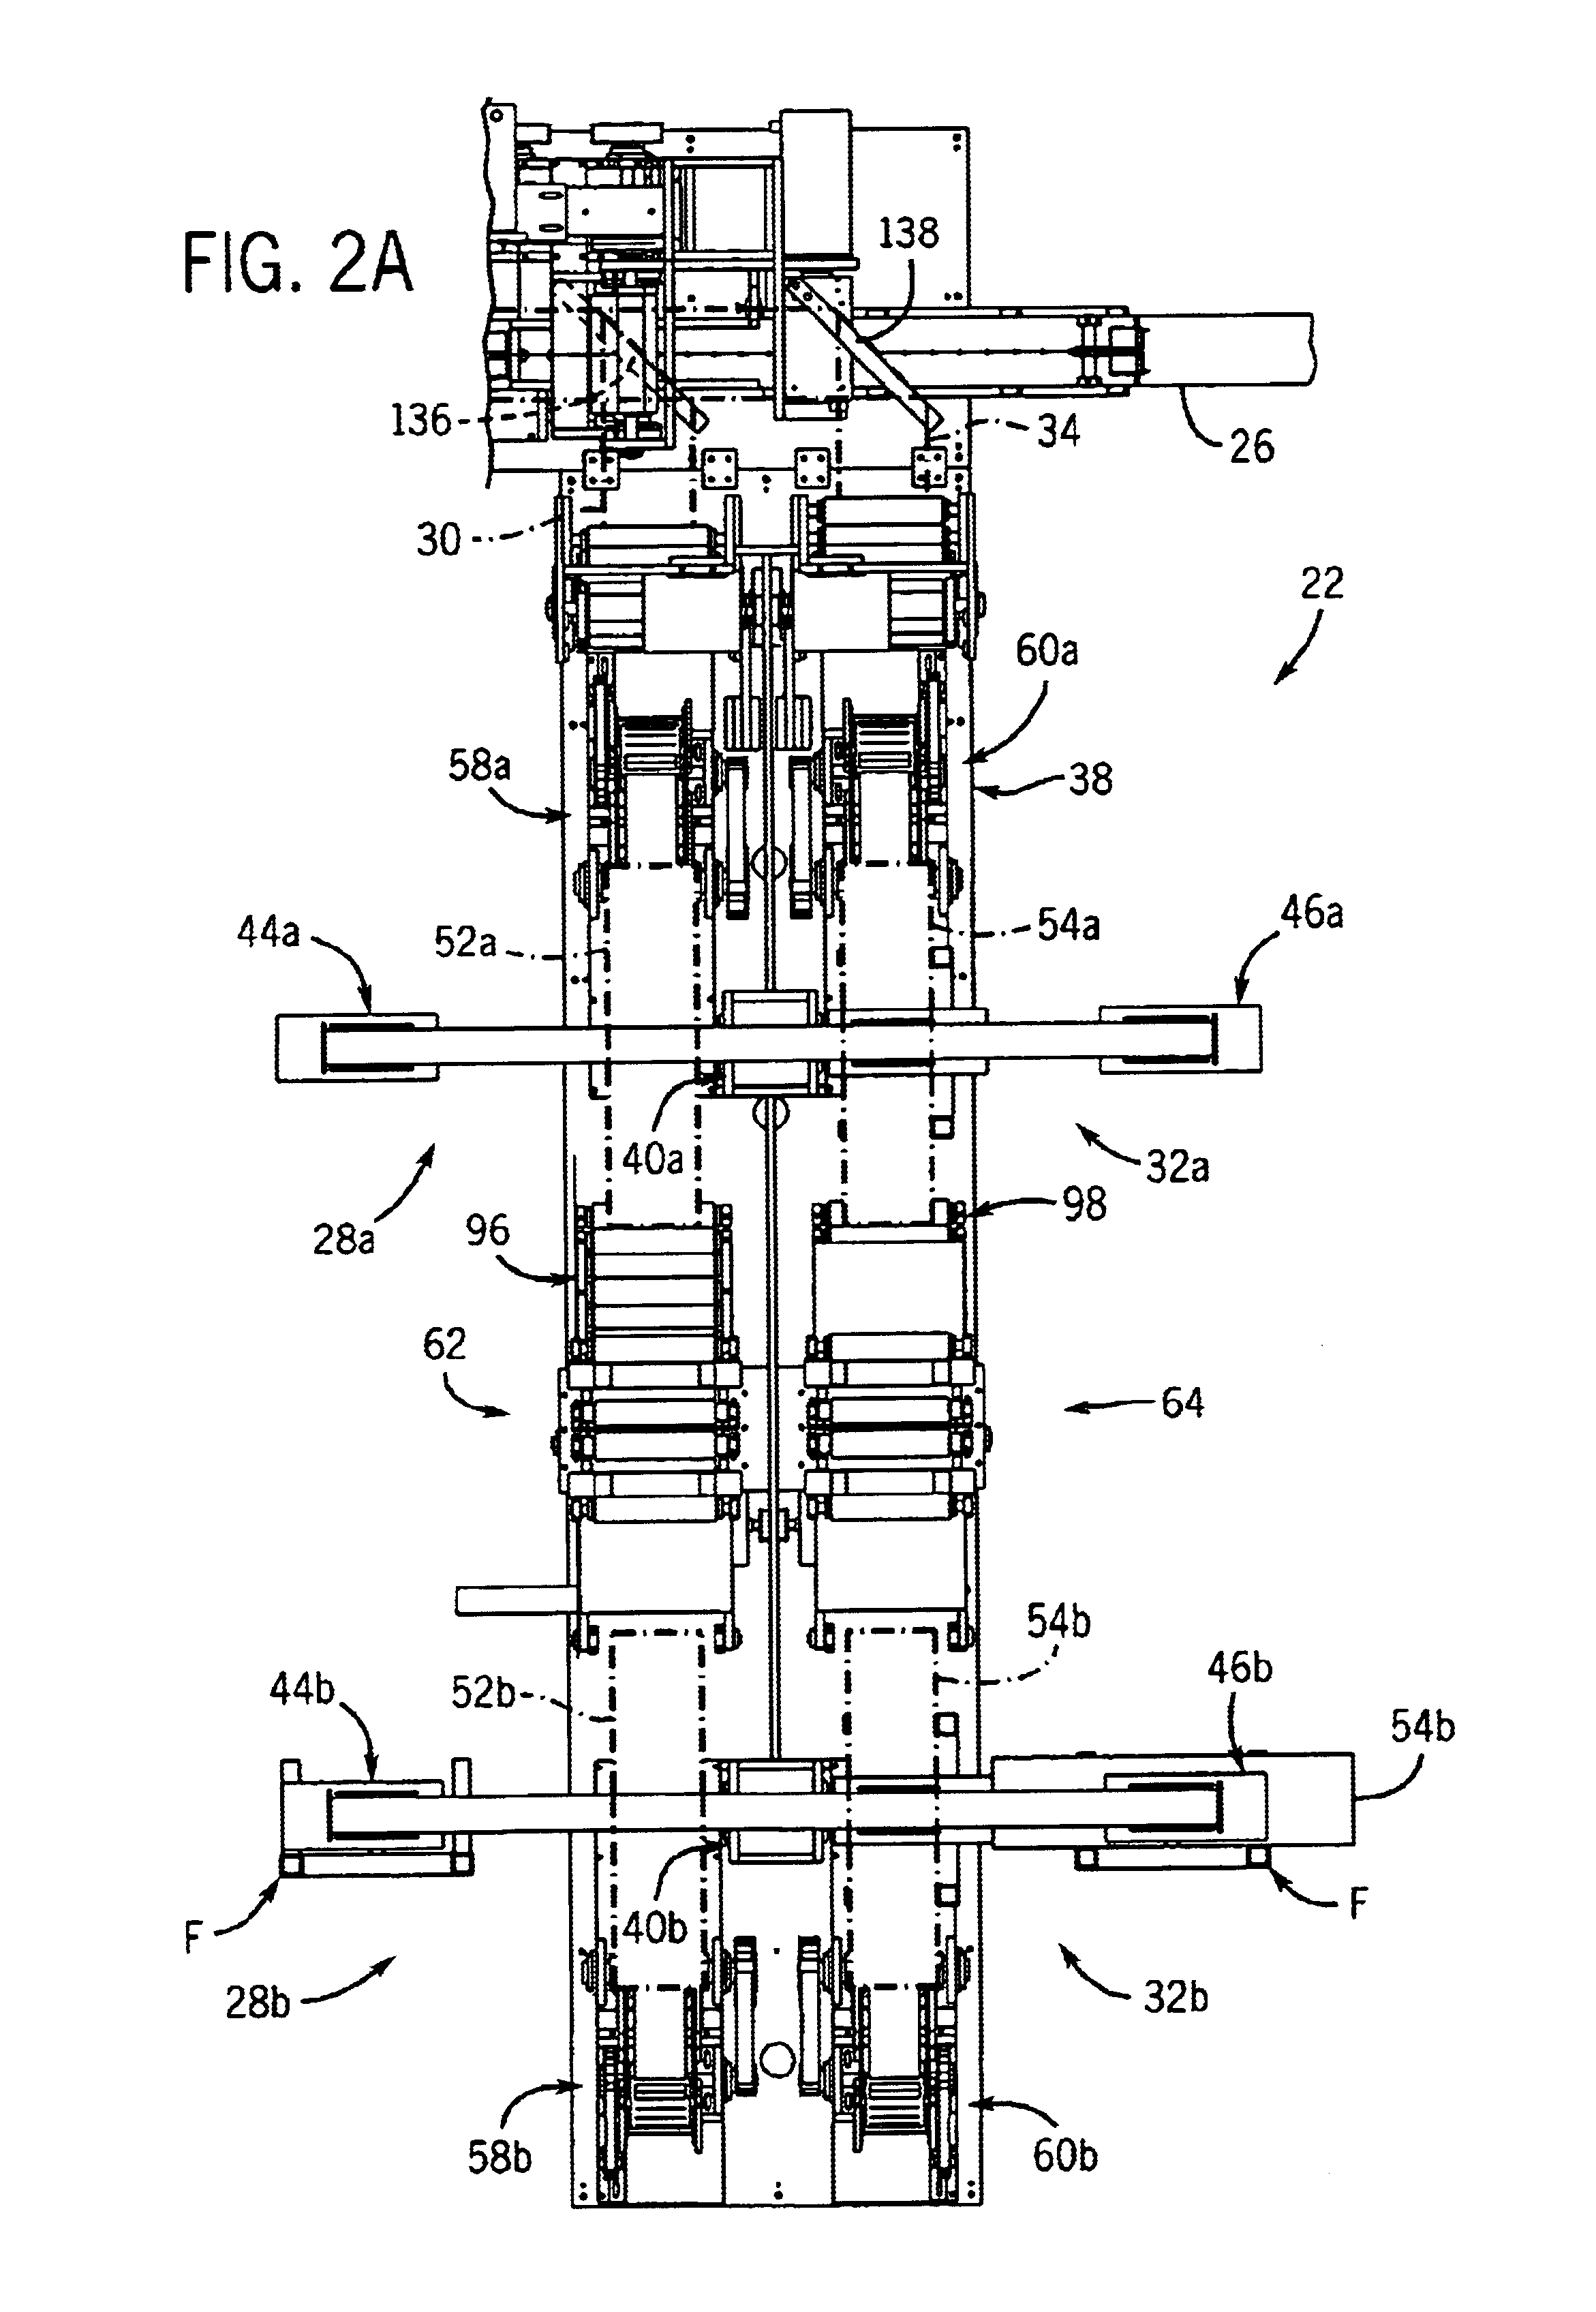 Banding system including an internal backing member for wrapping an elongated article such as a stack of interfolded paper towels